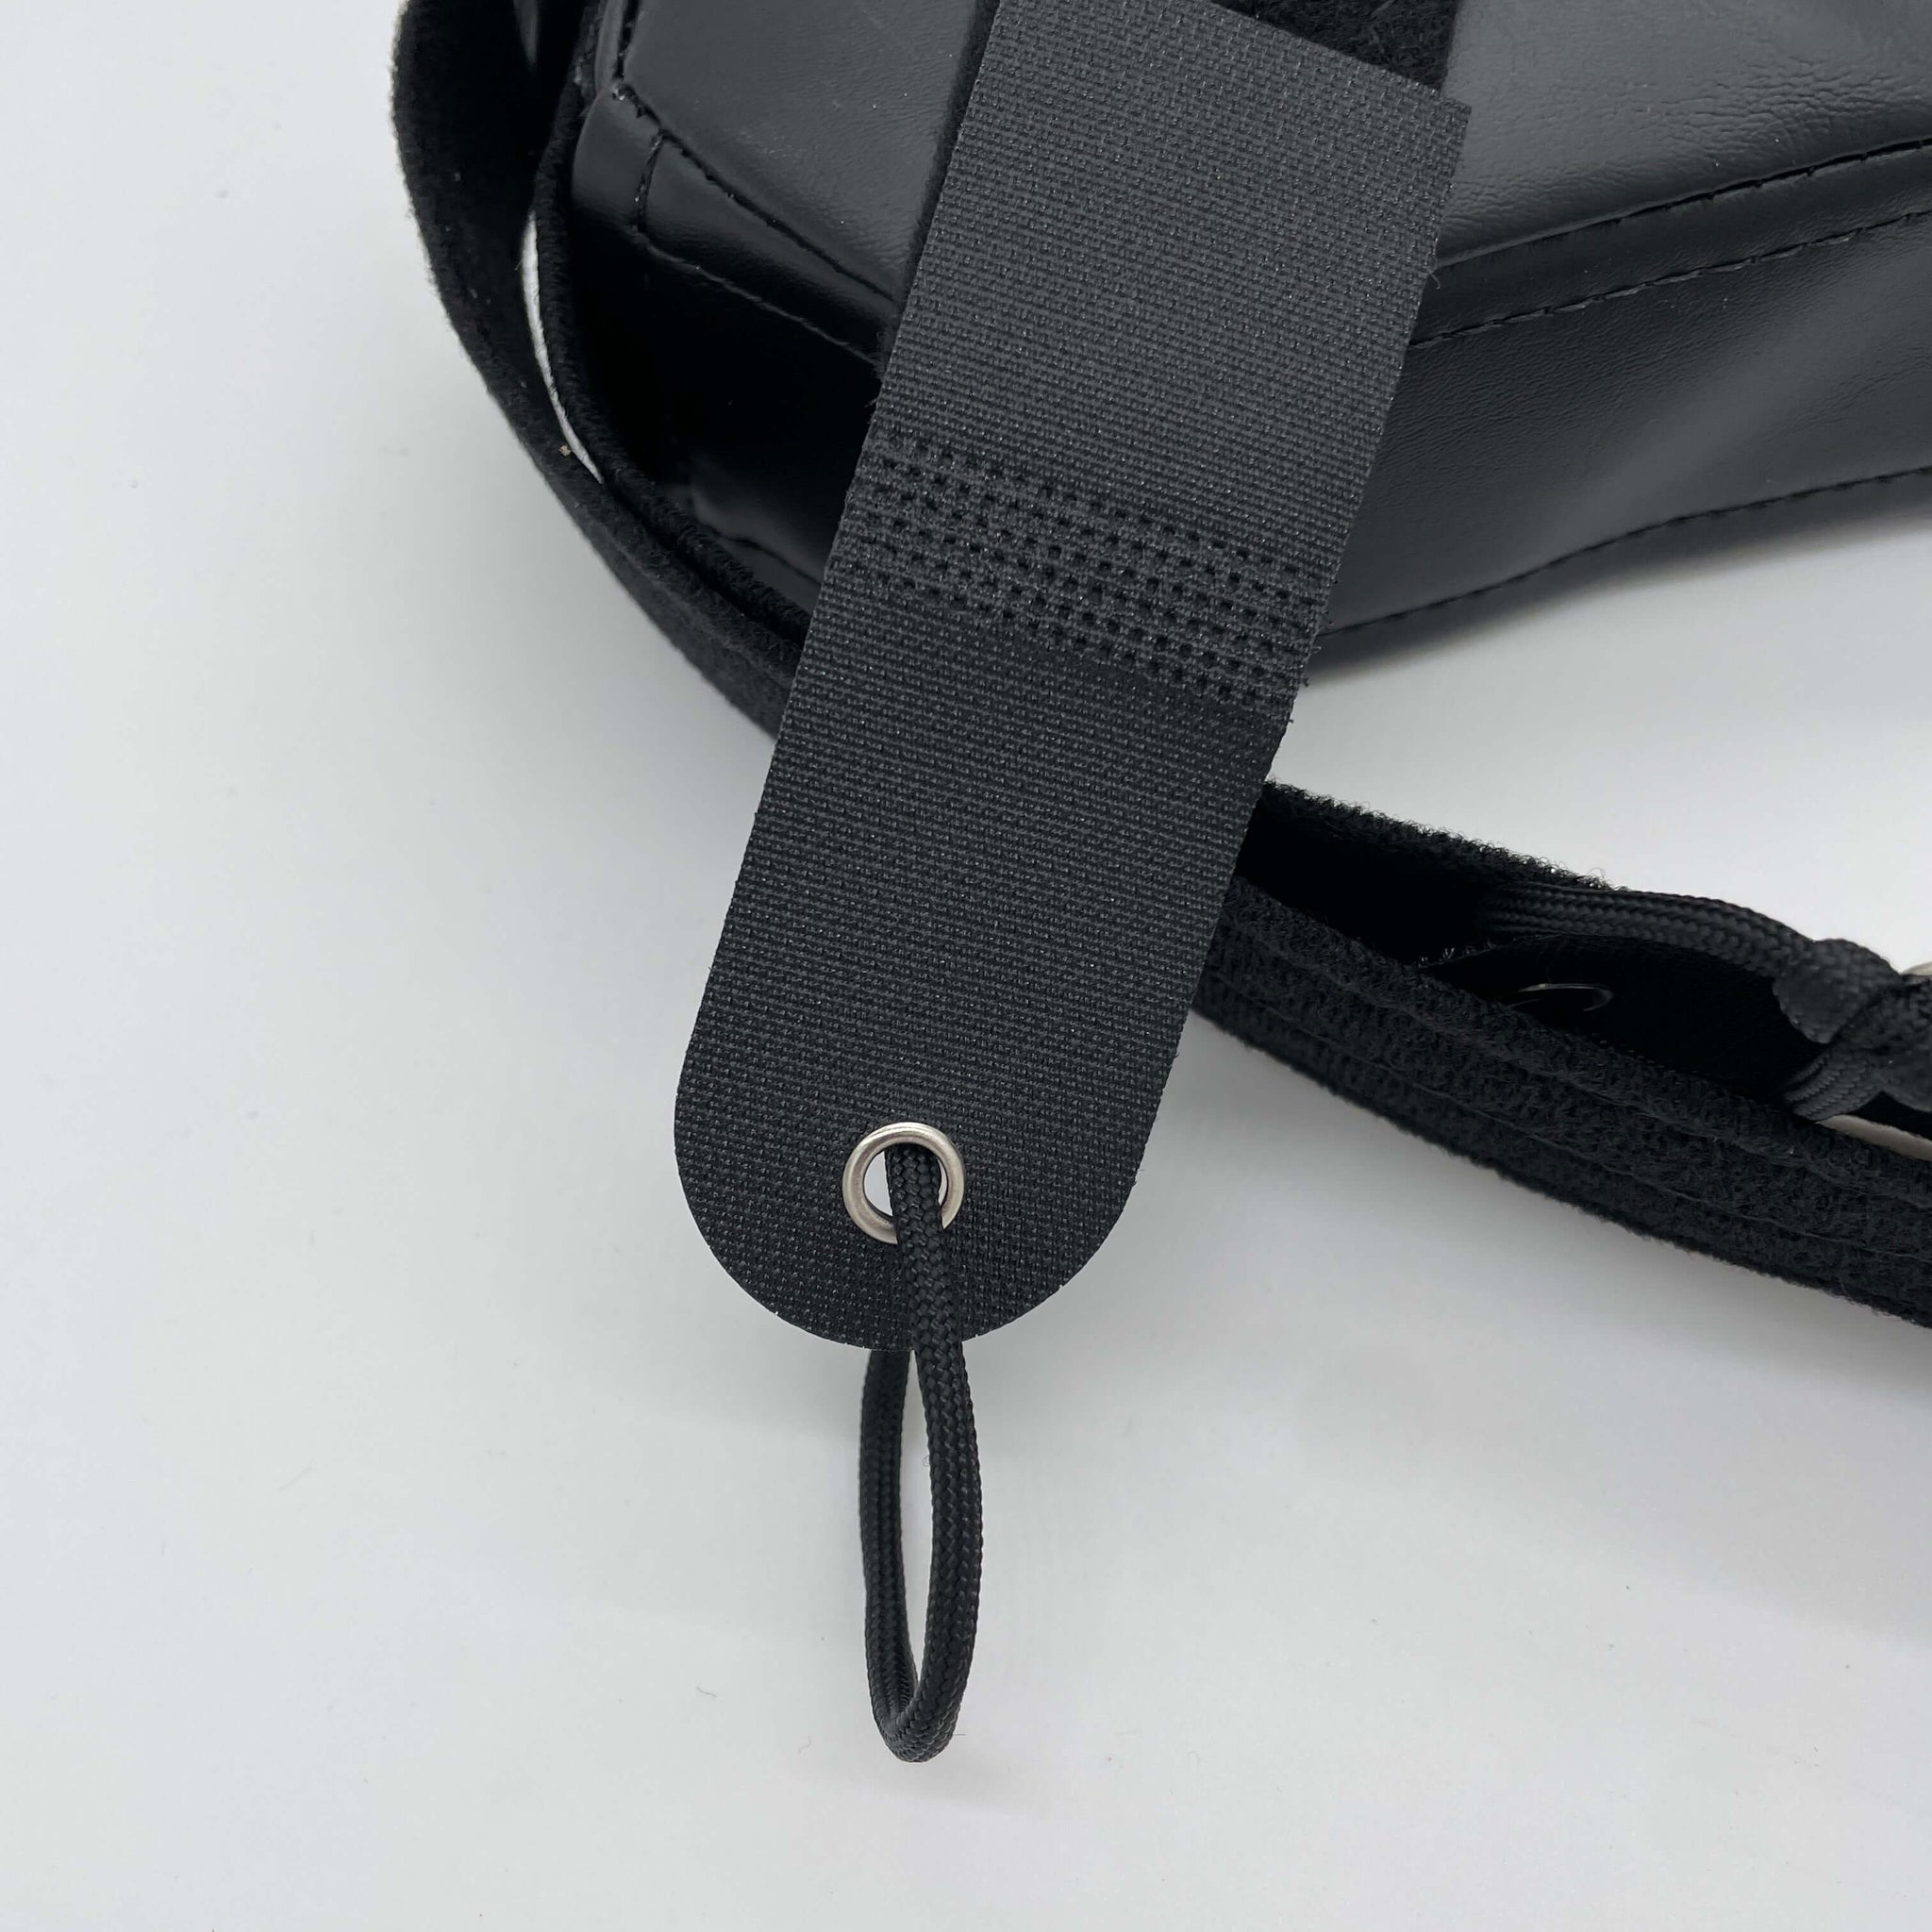 A grommet and loop in the end of a strap for quads to hook their thumb using a LapMat™